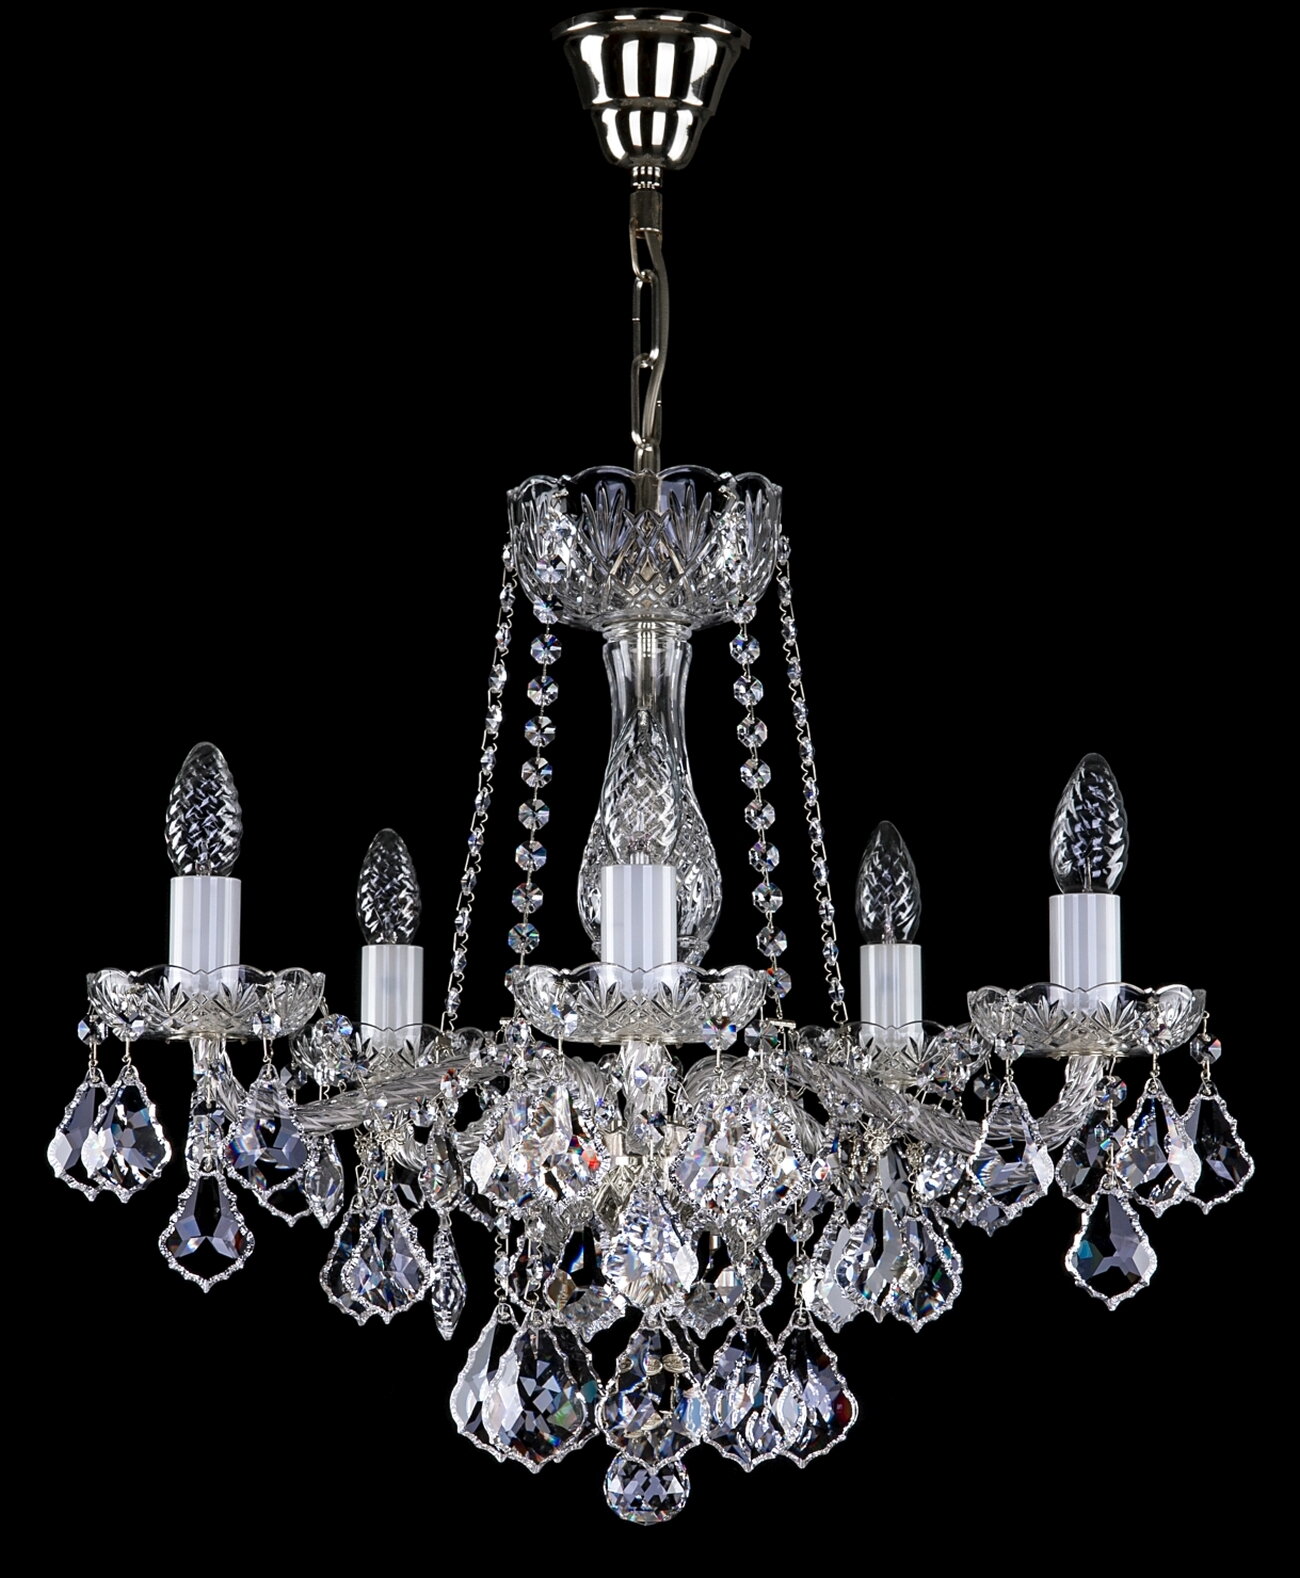 Cut Glass Crystal Chandelier L16045ce, Crystal Candle Chandelier Standard Sizes